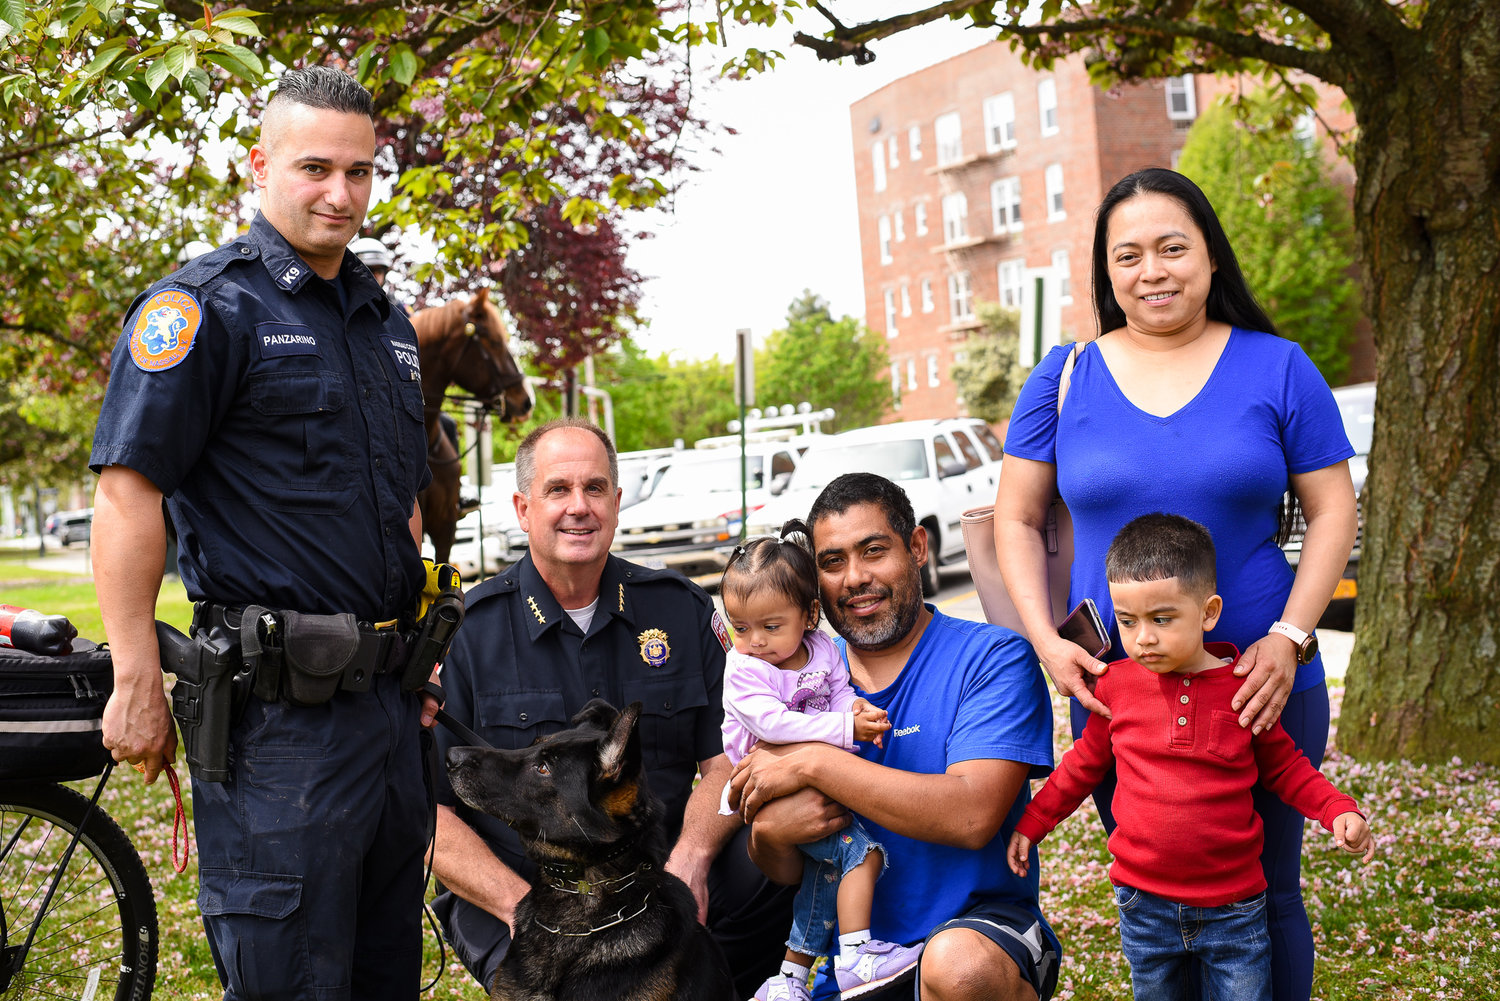 K-9 Unit Police Officer Scott Panzarino and Chief Michael Smith showed Panzarino’s canine partner, Steel, to Ingrid Ortiz, Miguel Lopez, and their children, 18-month-old Katya and three-year-old Brando, at the Freeport Police Department open house last Saturday